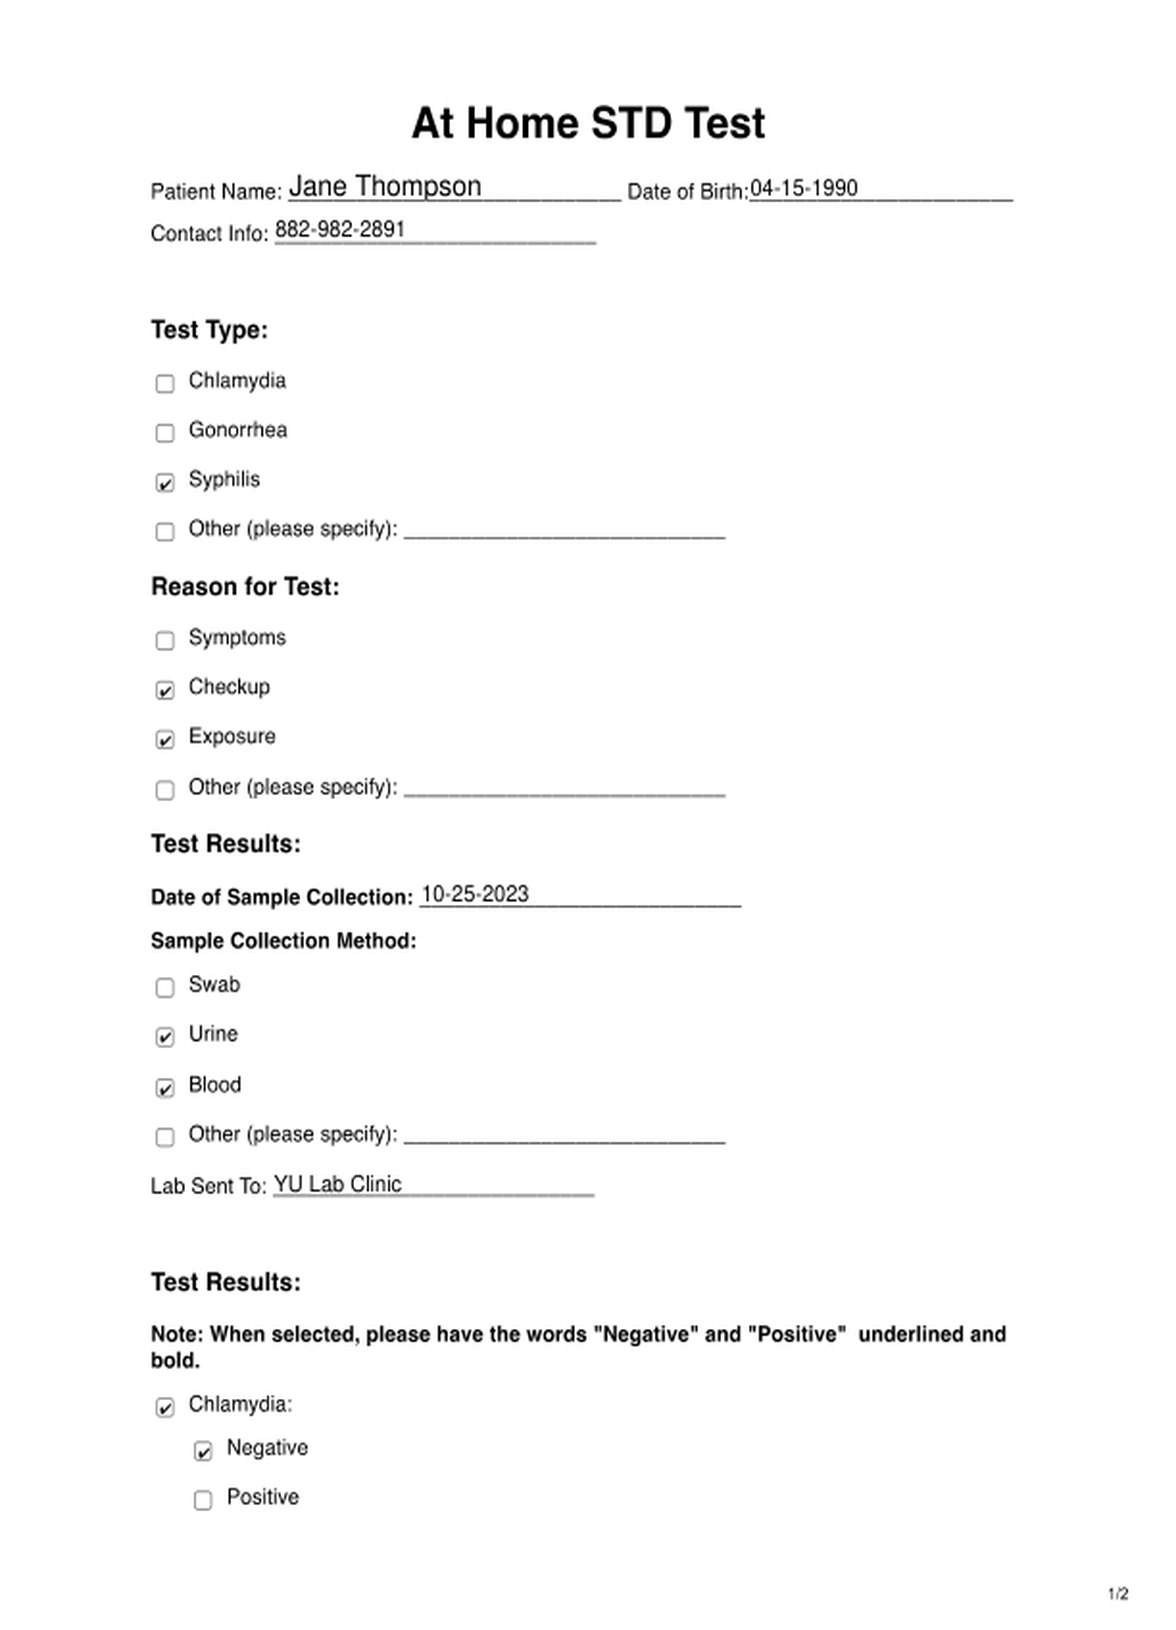 At Home STD Test PDF Example